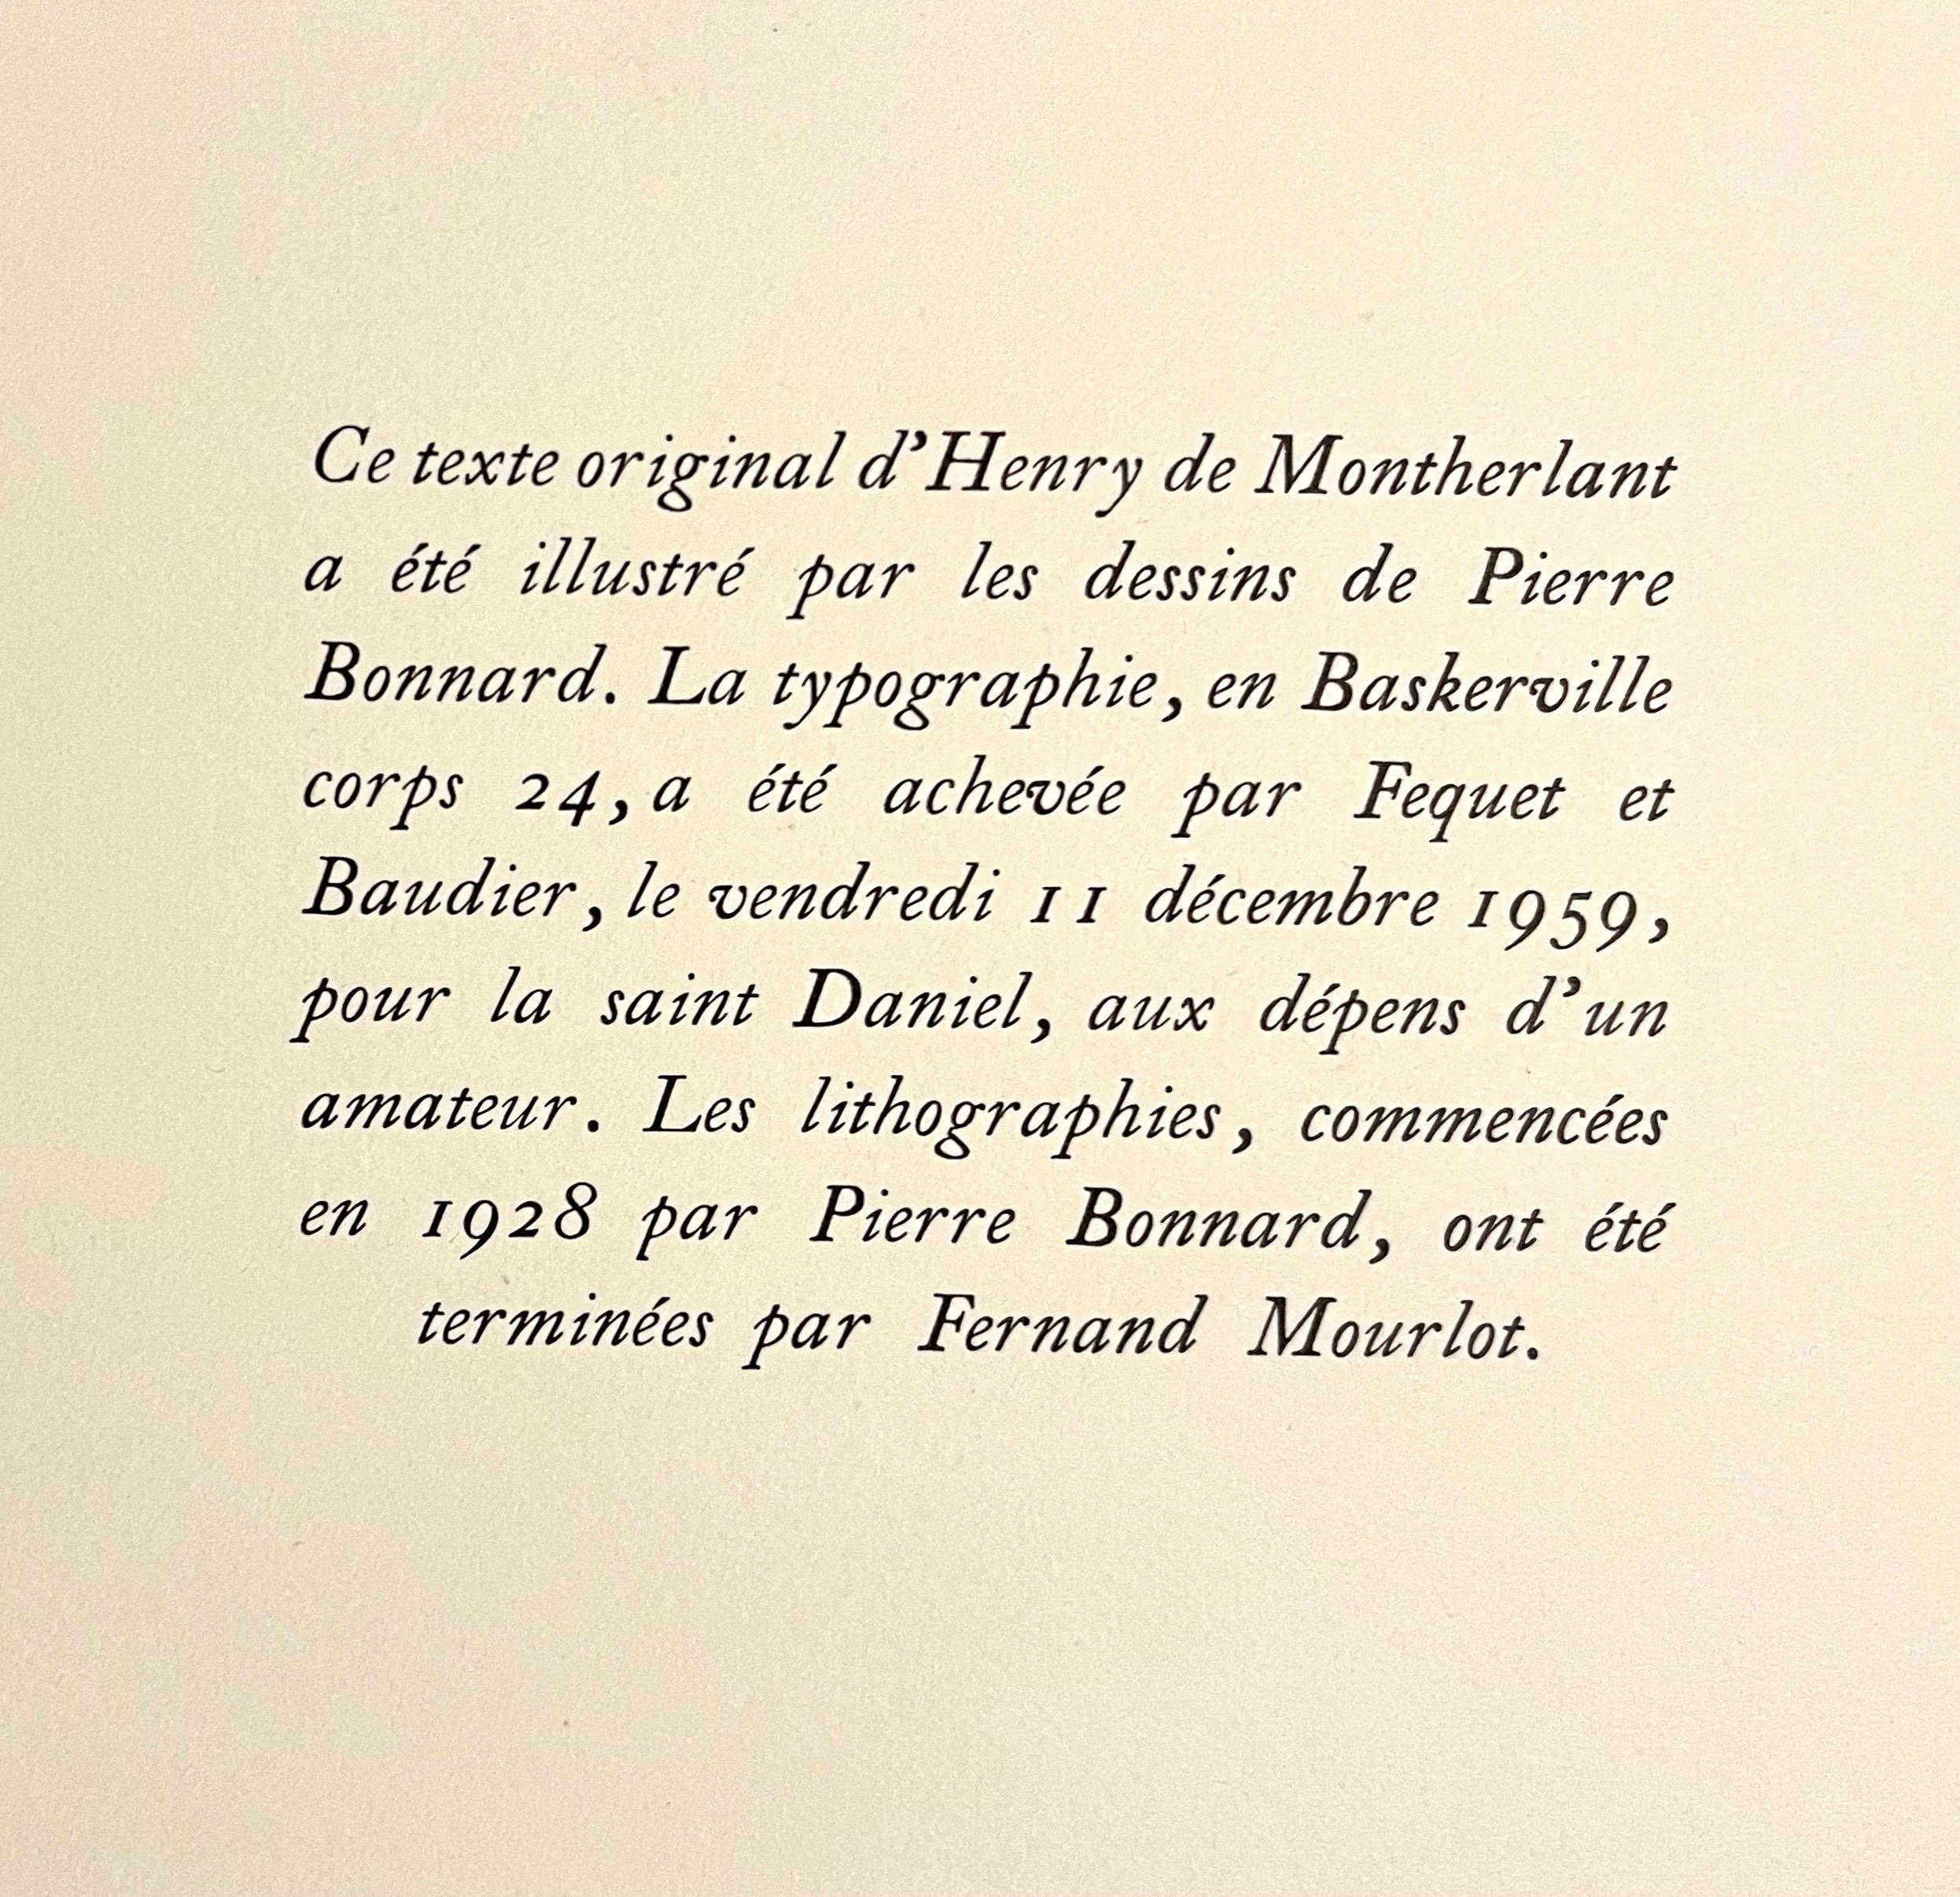 
This is from a  limited edition portfolio of original lithographs print Fernand Mourlot in Paris in 1958 from work done in collaboration with Bonnard which began in 1928. 
This is from the rare first edition, No. VII of 20 unbound sets, specially